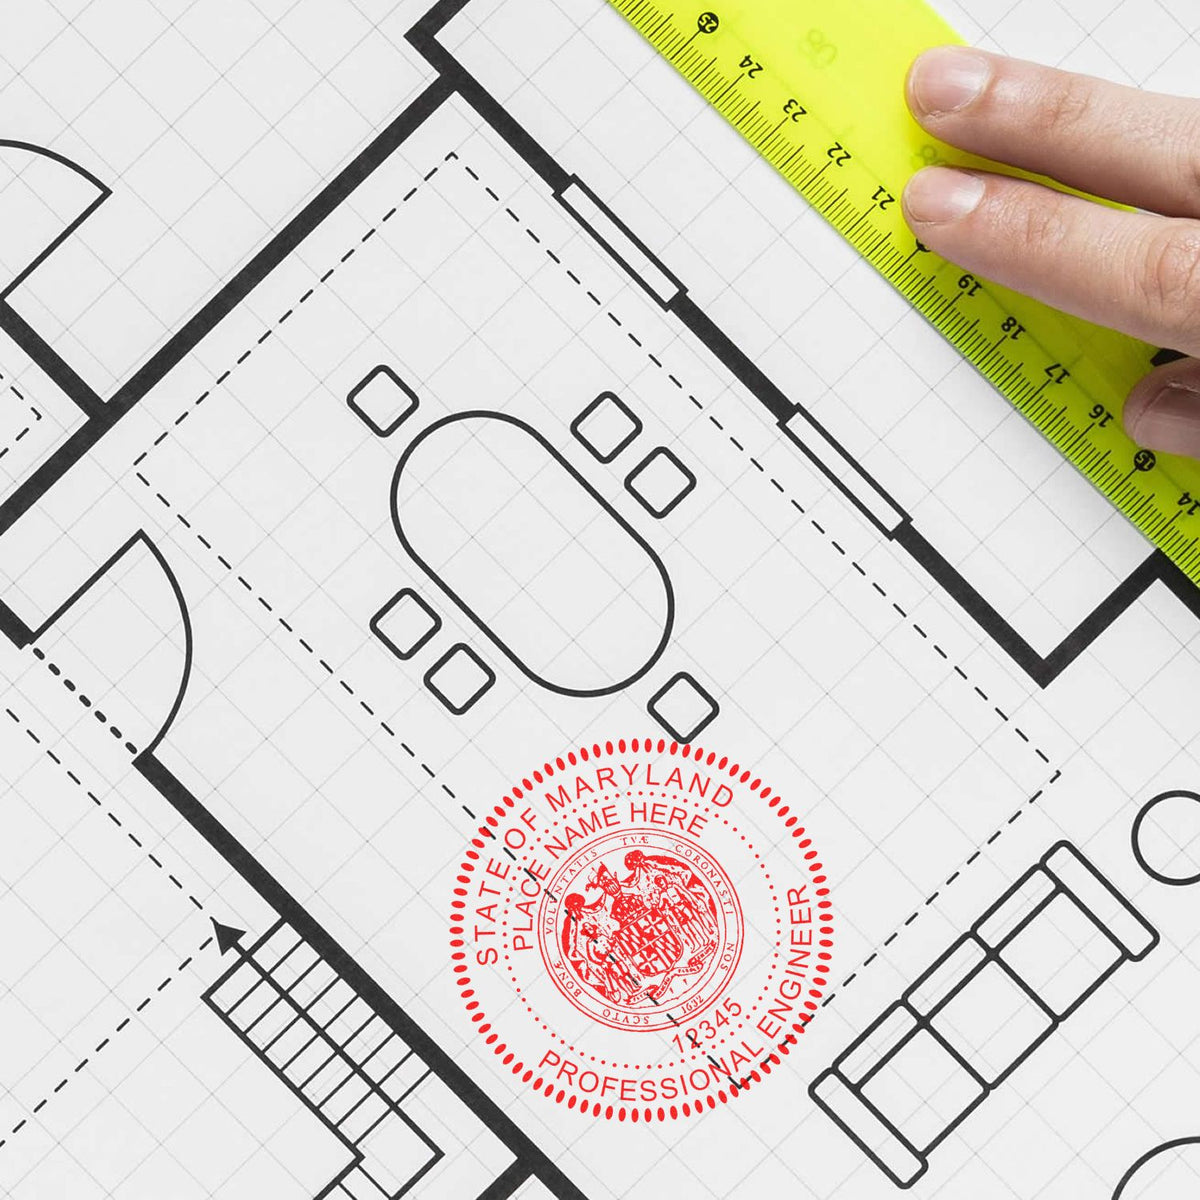 The Premium MaxLight Pre-Inked Maryland Engineering Stamp stamp impression comes to life with a crisp, detailed photo on paper - showcasing true professional quality.